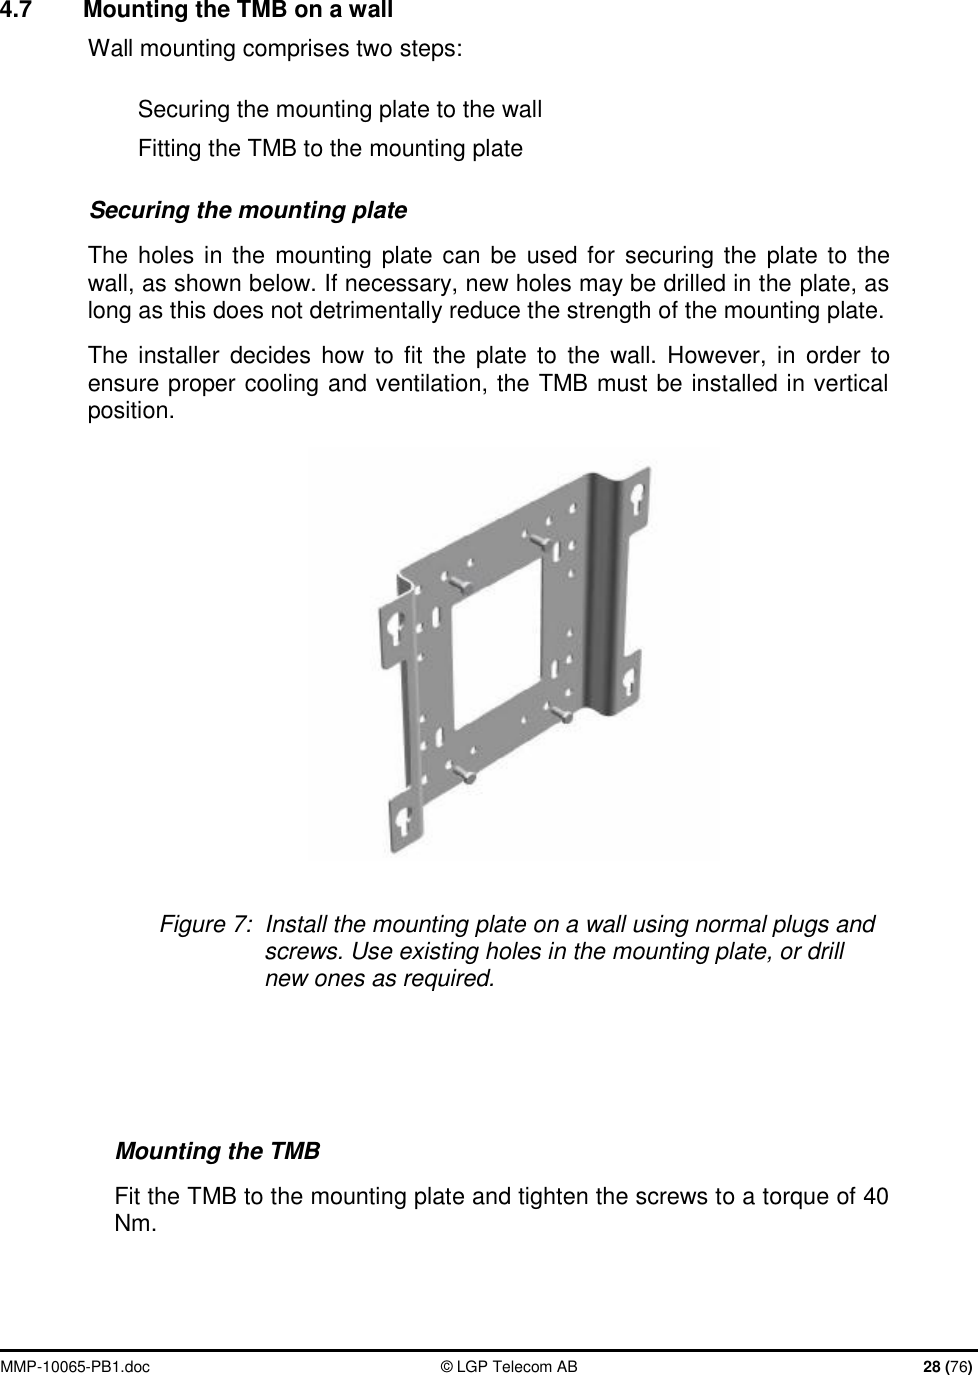  MMP-10065-PB1.doc  © LGP Telecom AB  28 (76)  4.7  Mounting the TMB on a wall  Wall mounting comprises two steps: Securing the mounting plate to the wall Fitting the TMB to the mounting plate Securing the mounting plate The holes in the mounting plate can be used for securing the plate to the wall, as shown below. If necessary, new holes may be drilled in the plate, as long as this does not detrimentally reduce the strength of the mounting plate. The installer decides how to fit the plate to the wall. However, in order to ensure proper cooling and ventilation, the TMB must be installed in vertical position.   Figure 7:  Install the mounting plate on a wall using normal plugs and screws. Use existing holes in the mounting plate, or drill new ones as required.  Mounting the TMB Fit the TMB to the mounting plate and tighten the screws to a torque of 40 Nm. 